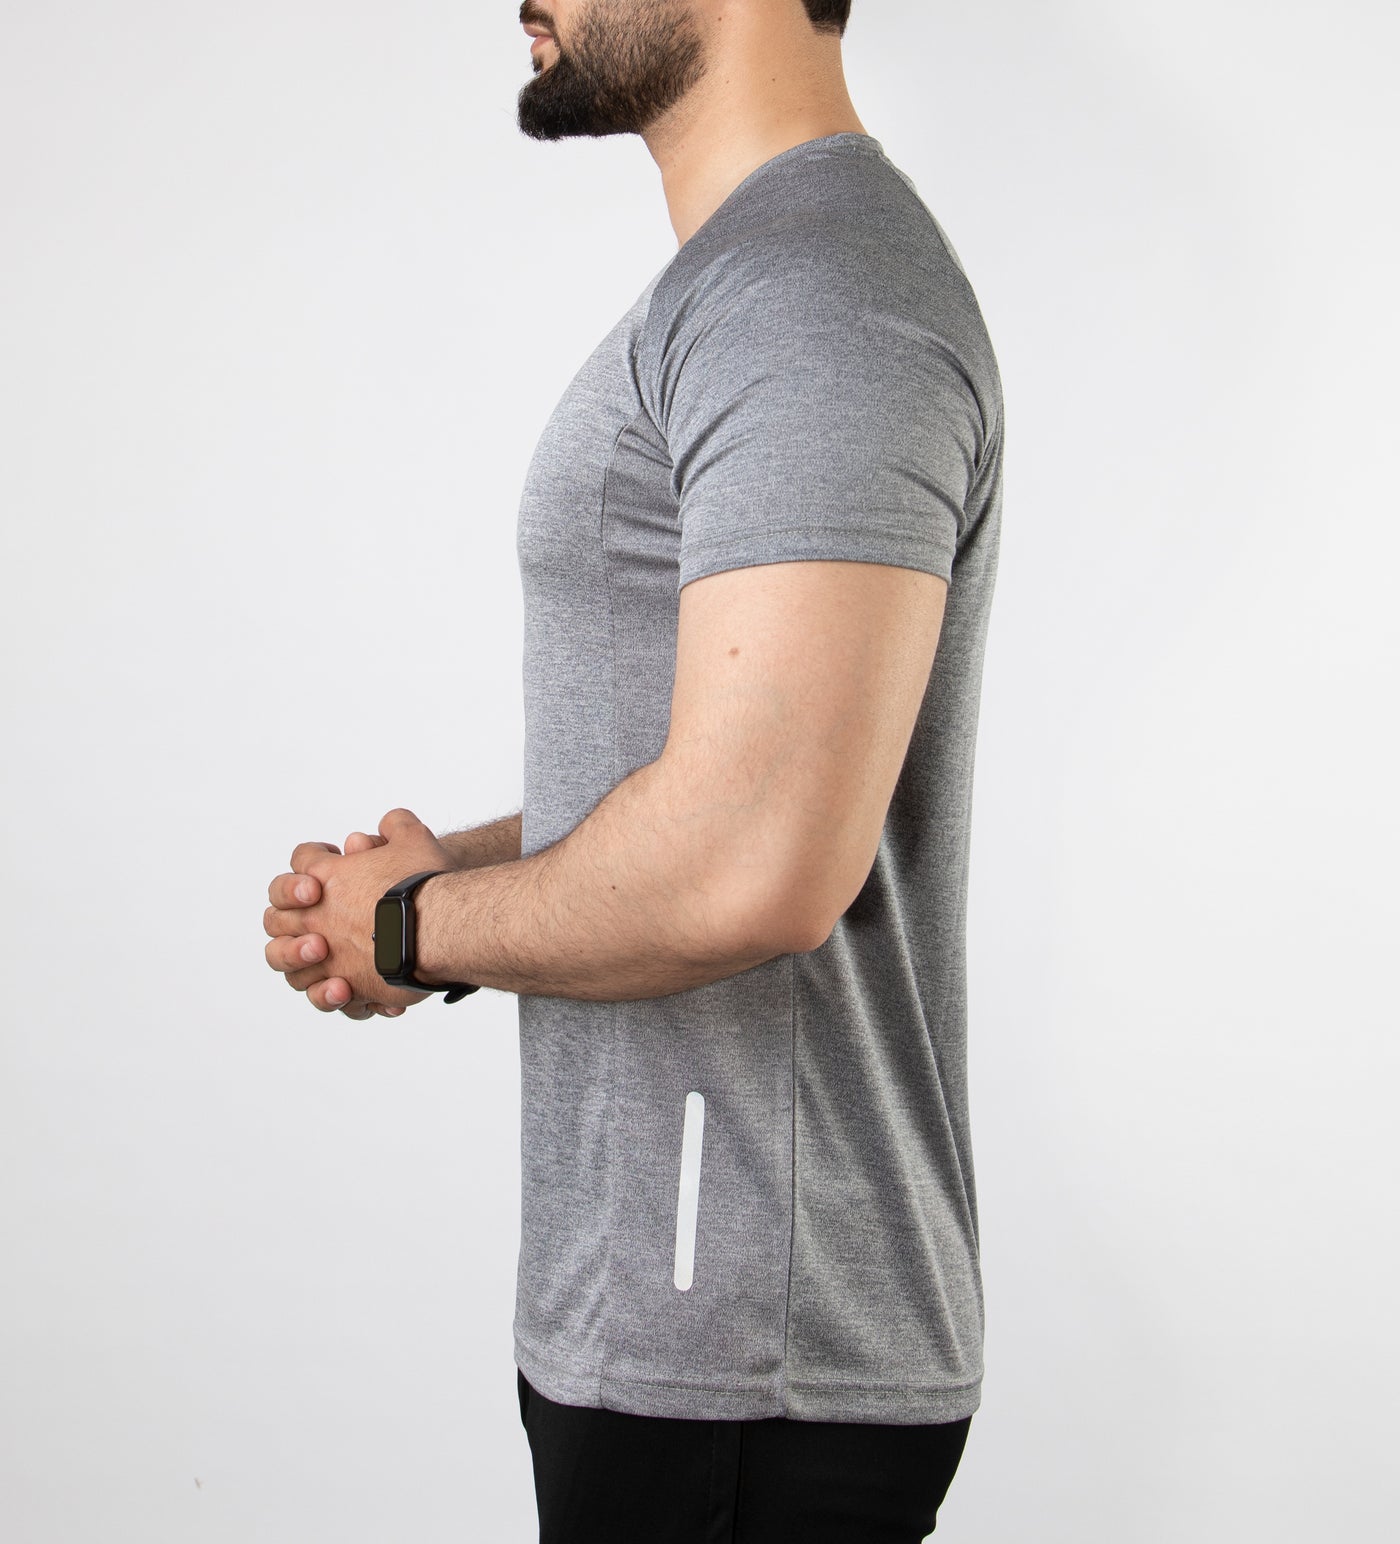 Textured Gray Quick Dry T-Shirt with Reflective Detailing